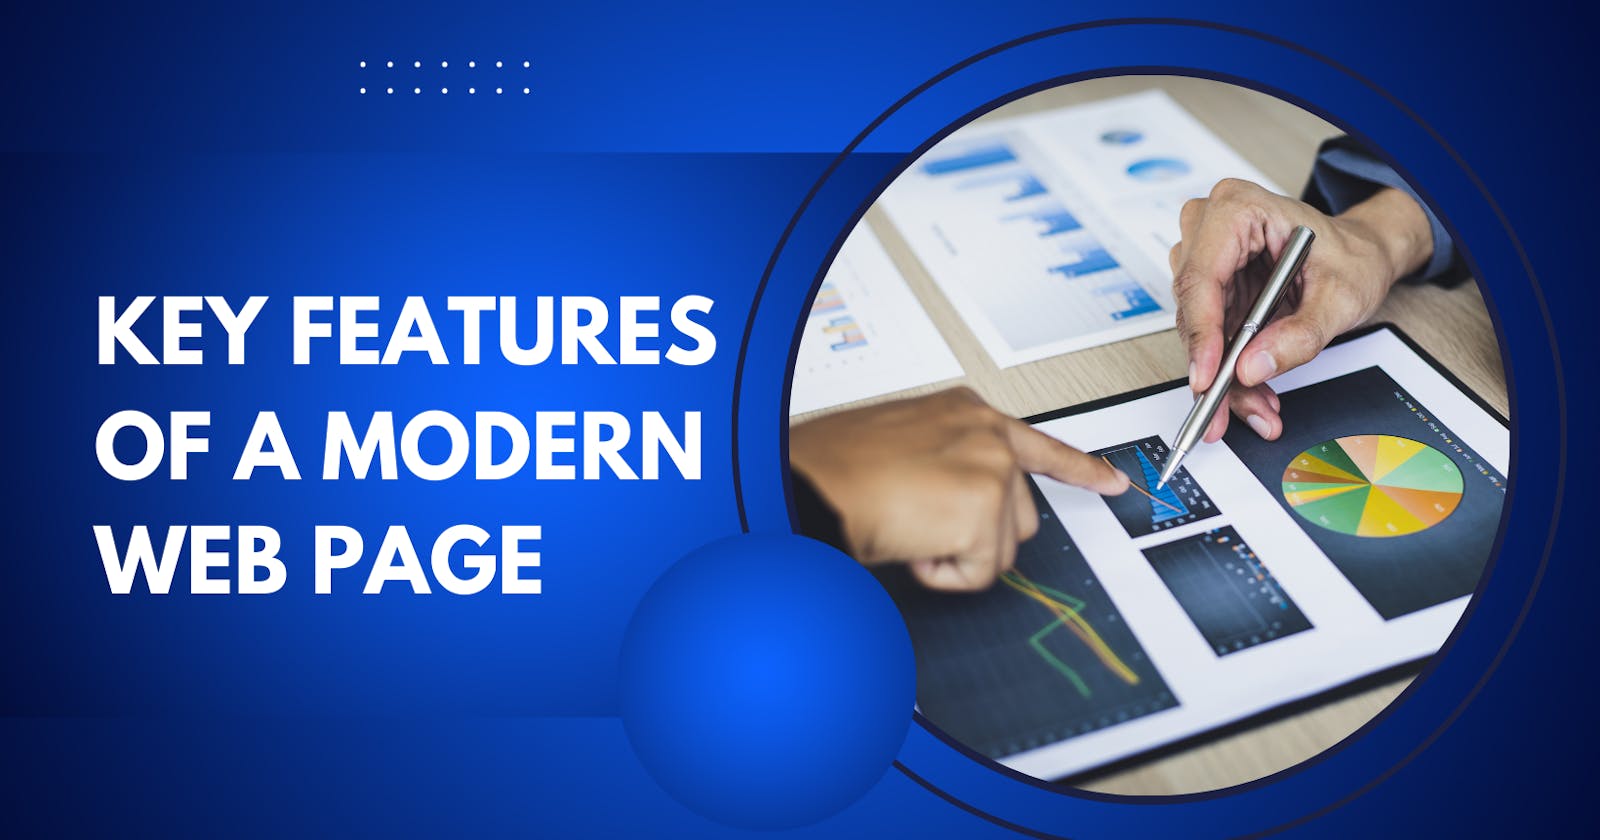 Key features of a modern web page